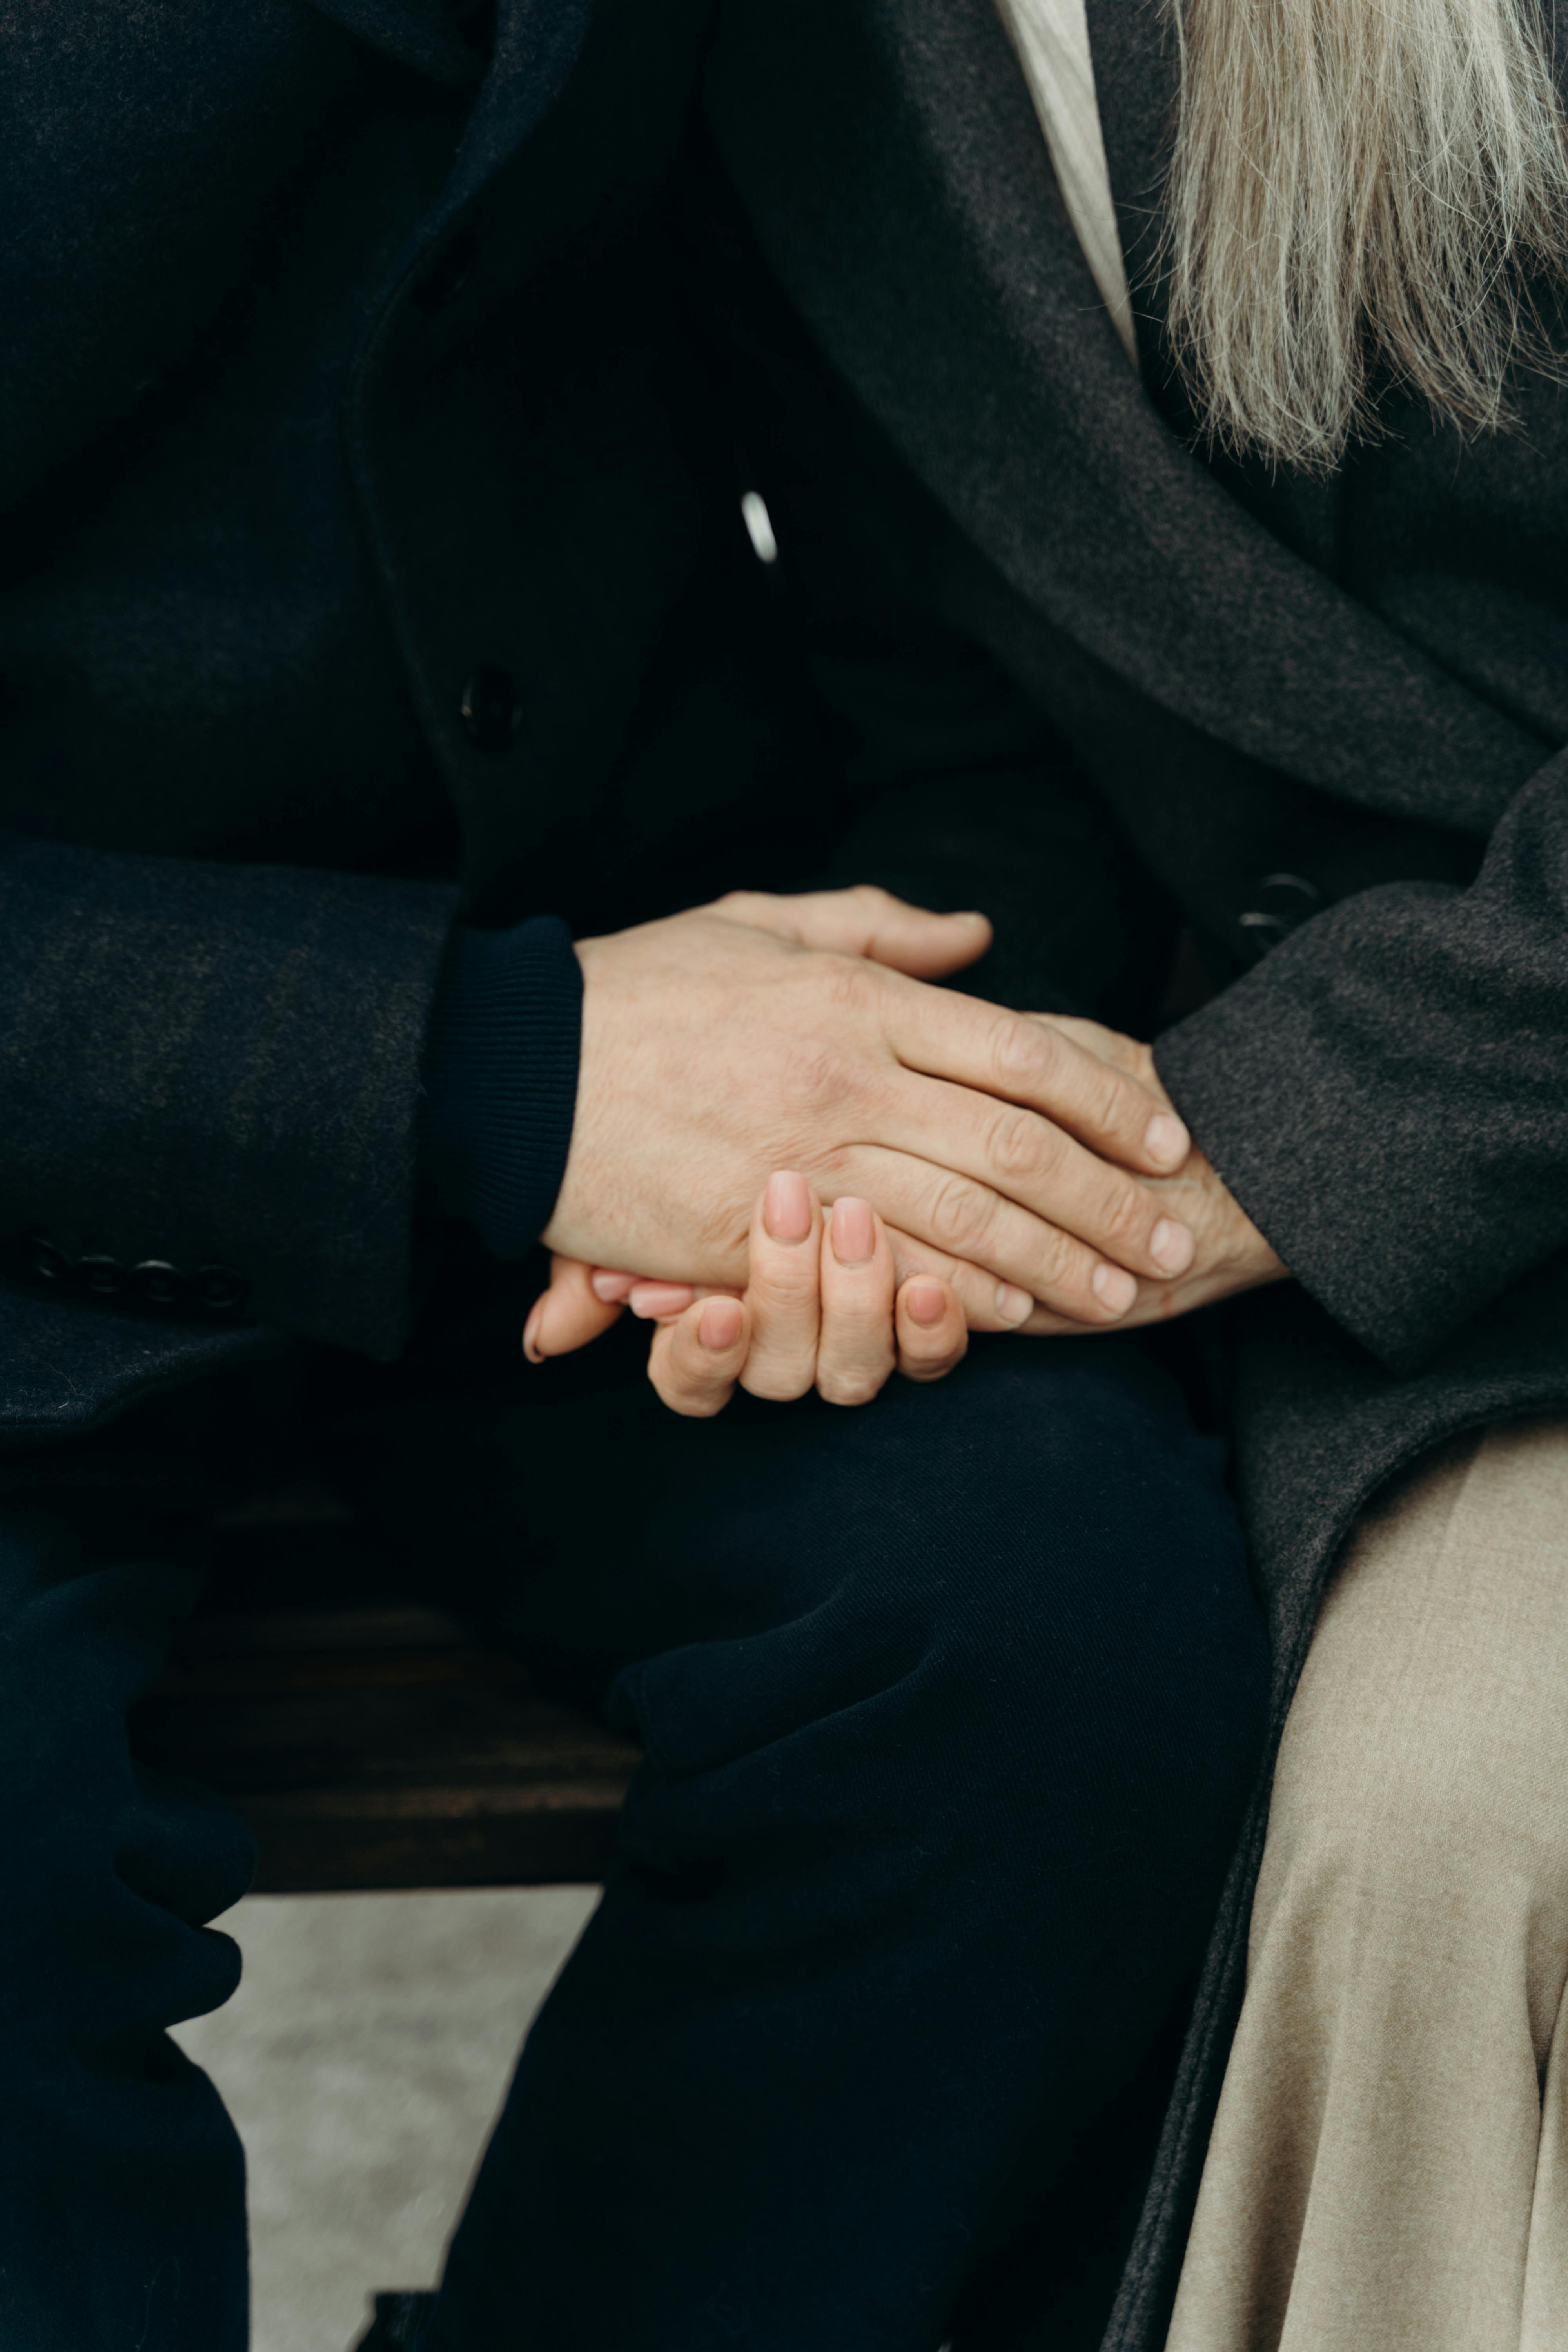 A man and woman holding hands | Source: Pexels